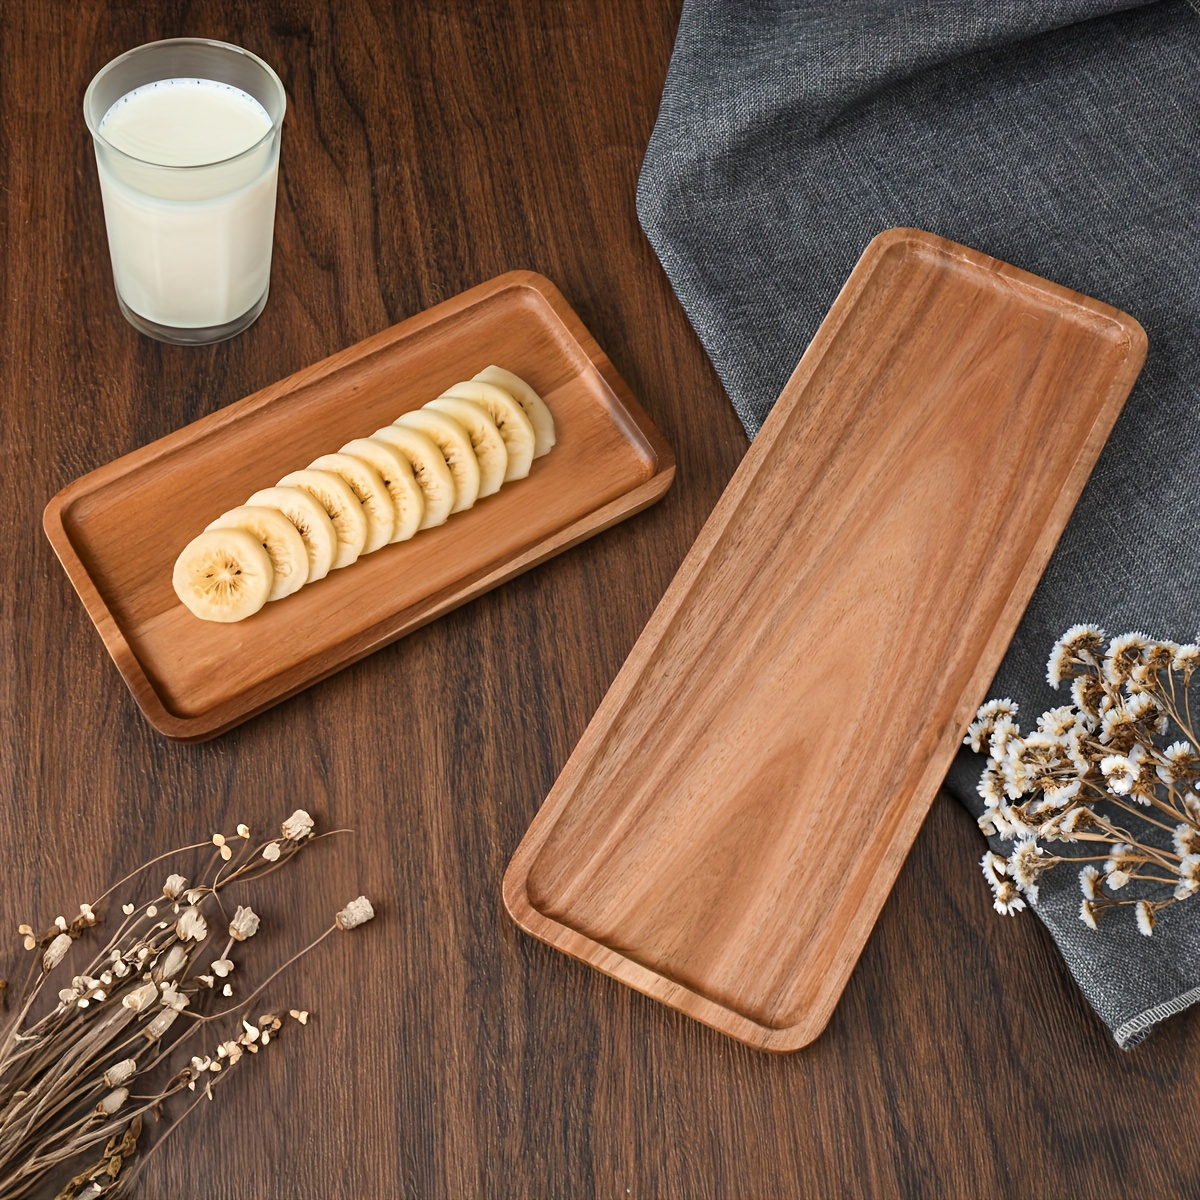 

Versatile Acacia Wood Serving Tray - Perfect For Breakfast, Desserts, Snacks & More - Ideal For Parties & Home Decor